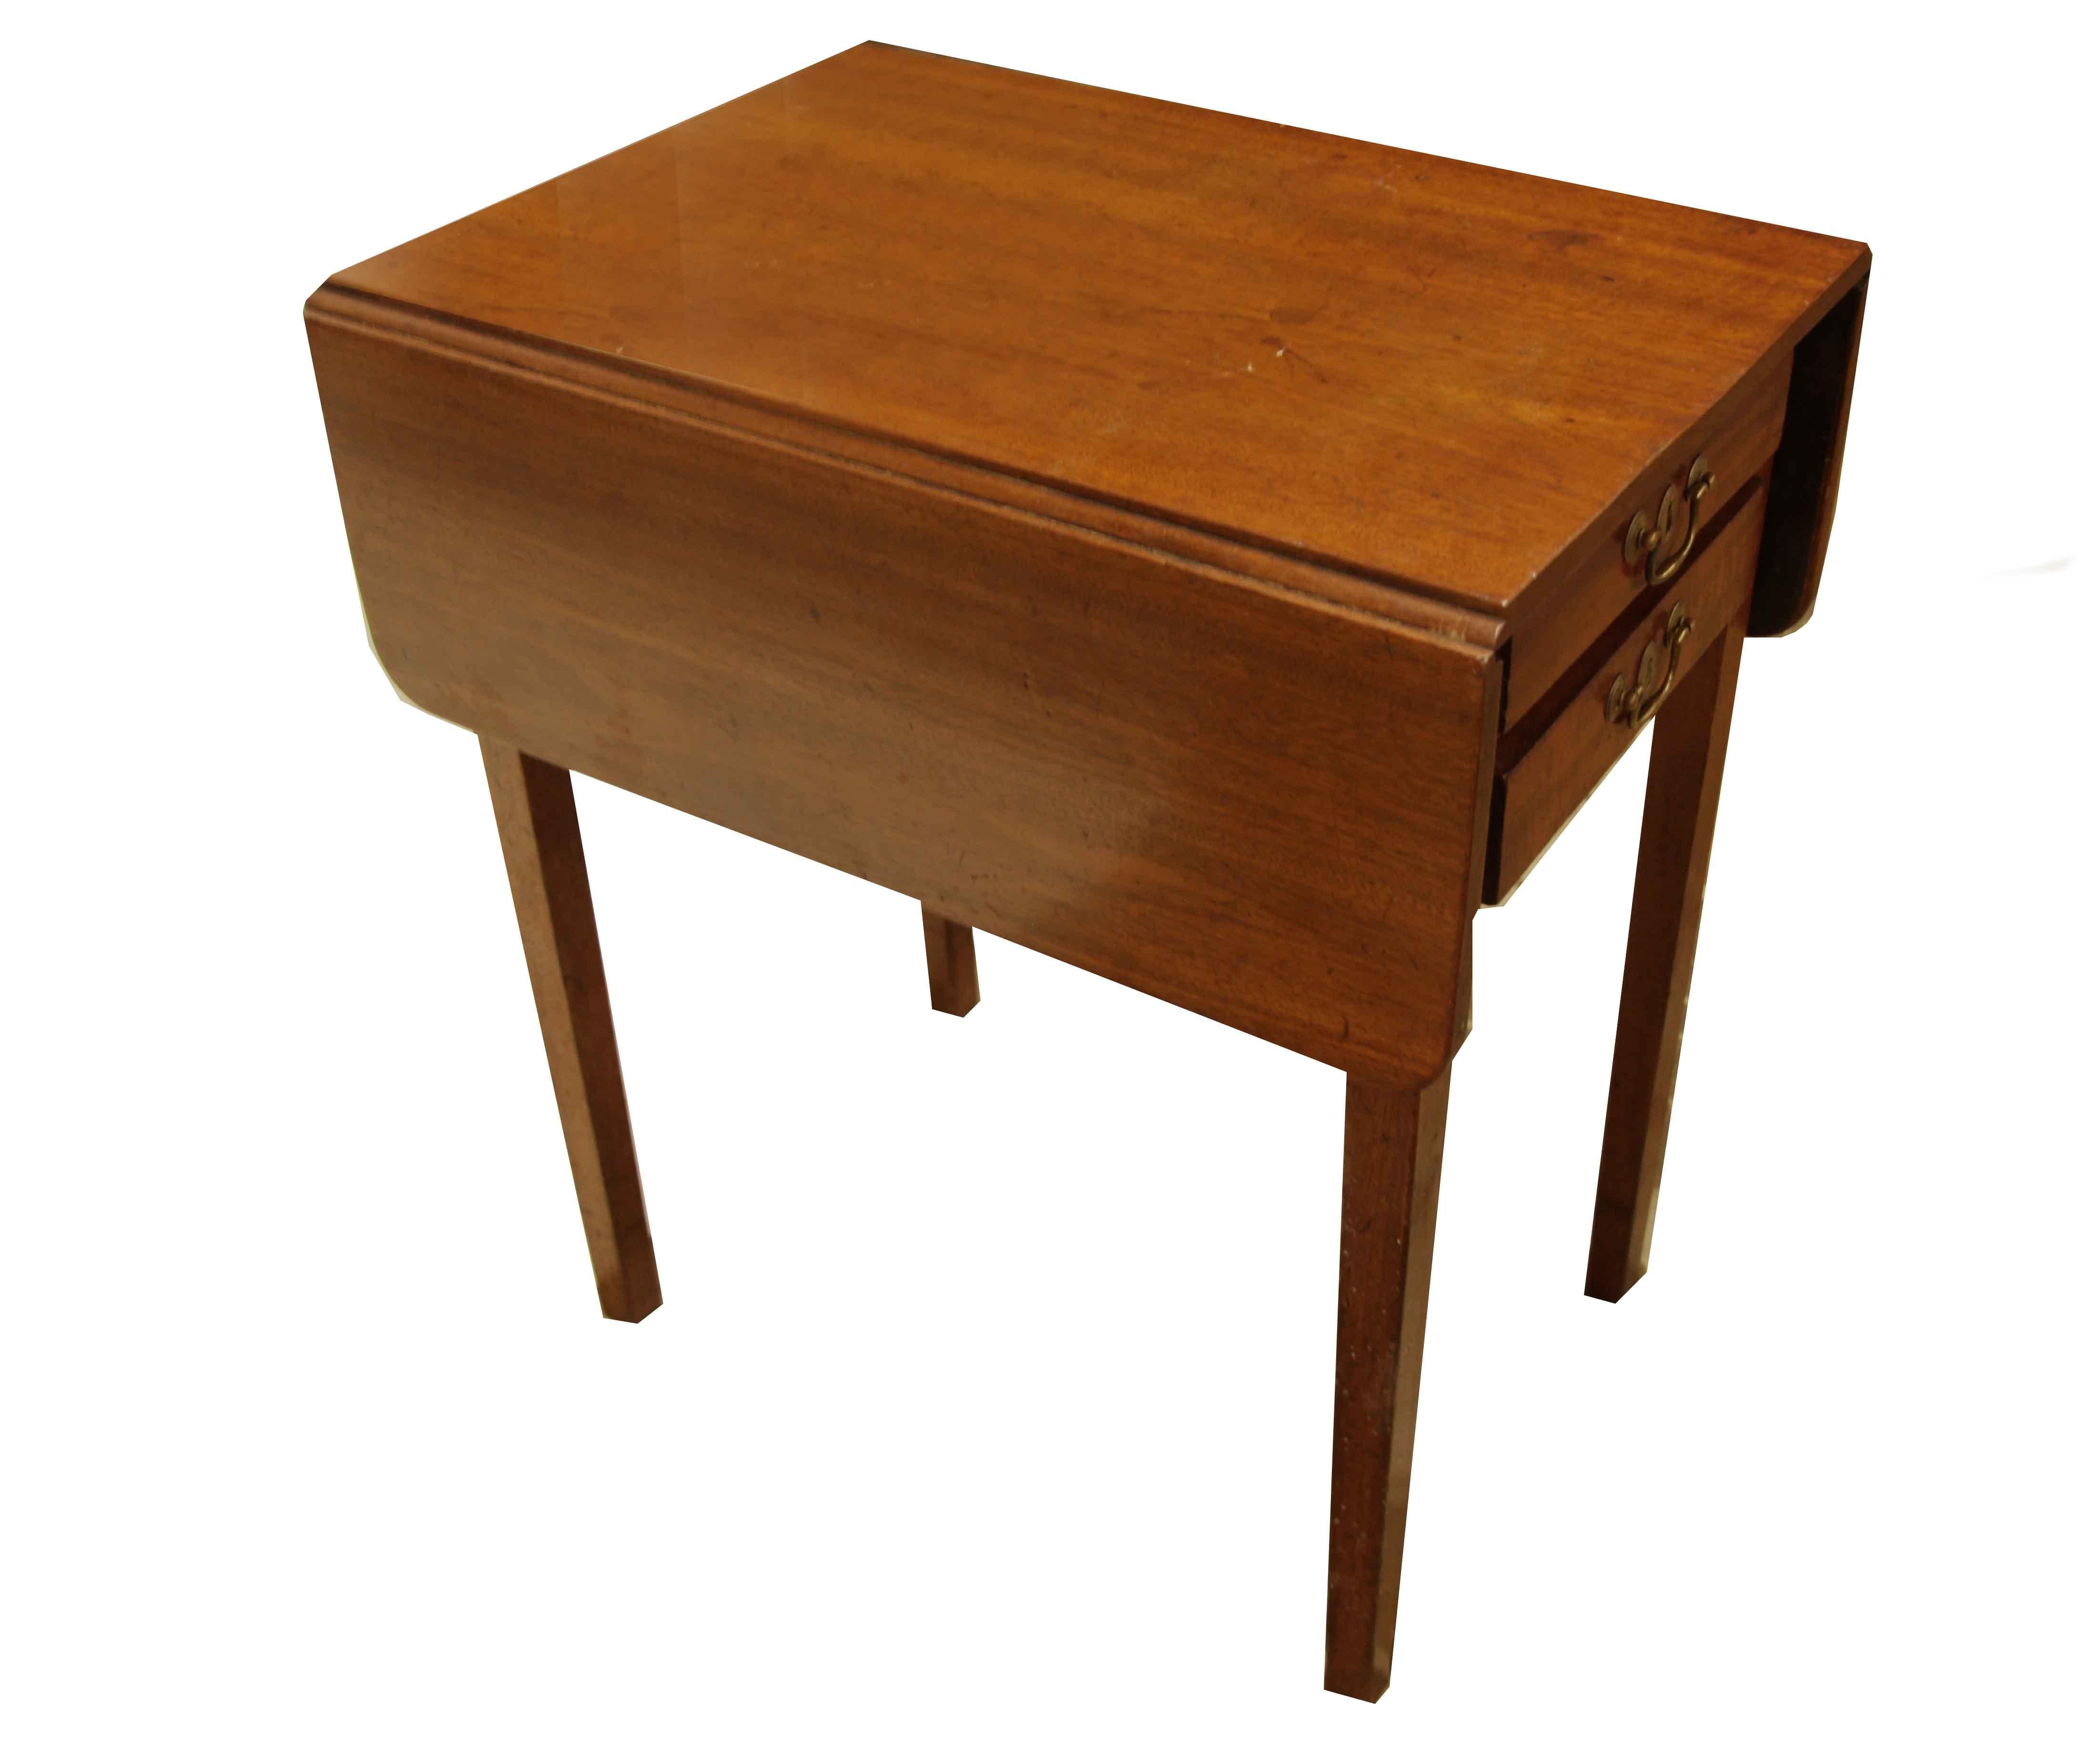 George III pembroke table,  this mahogany table has a pleasant warm color throughout,  the two drawers have swan neck pulls ( the back of the table have the same pulls but are faux drawers) ; the legs are nicely tapered and well proportioned. The